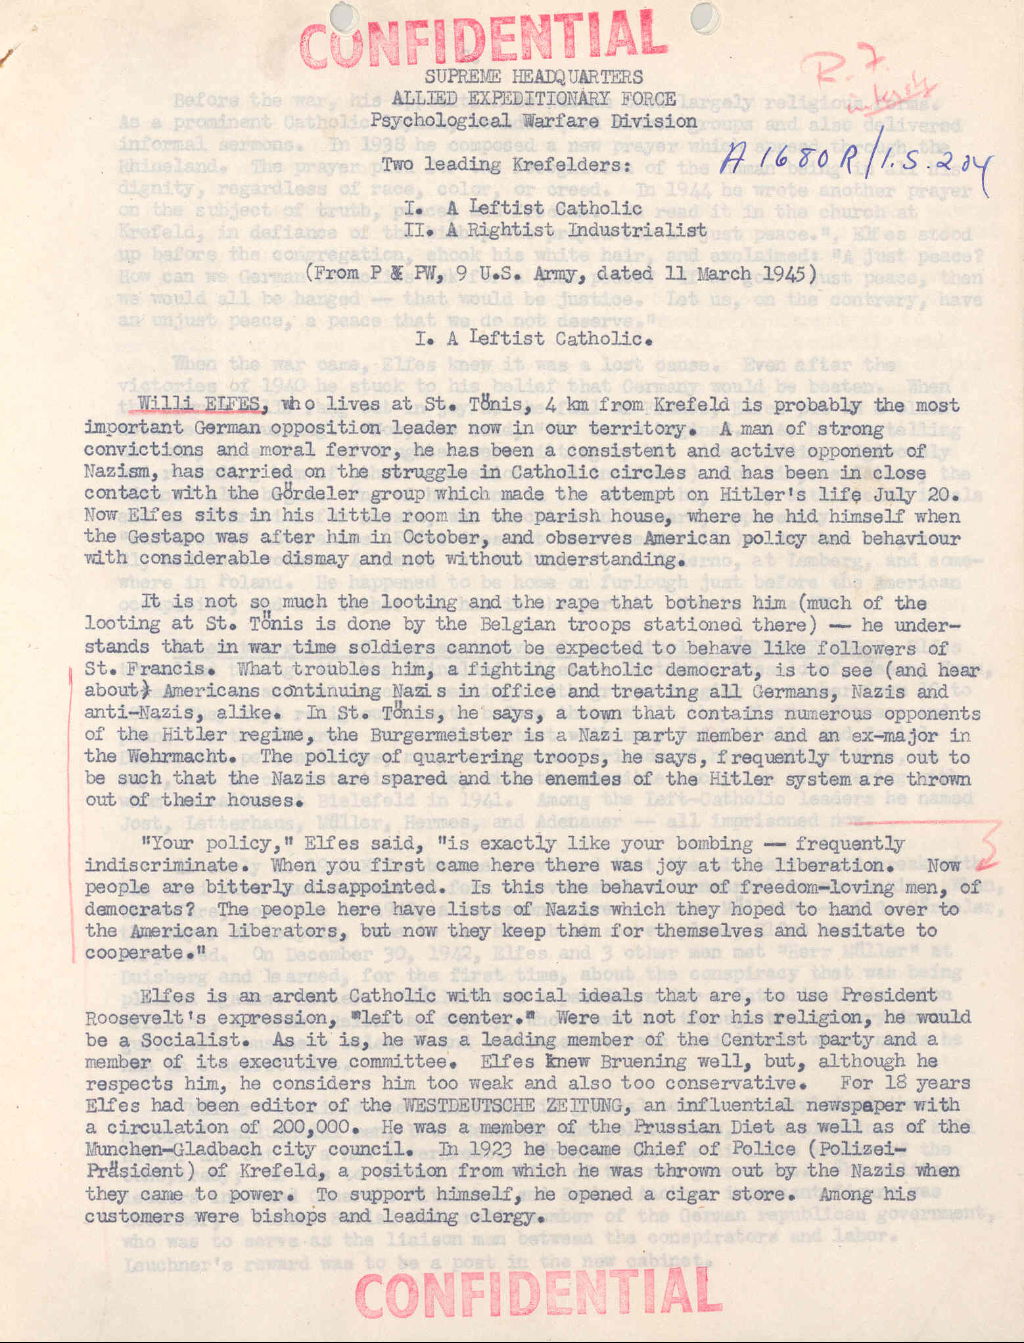 Report of an interview with Wilhelm Elfes, an opponent to the Nazi regime in Krefeld, 11 March 1945